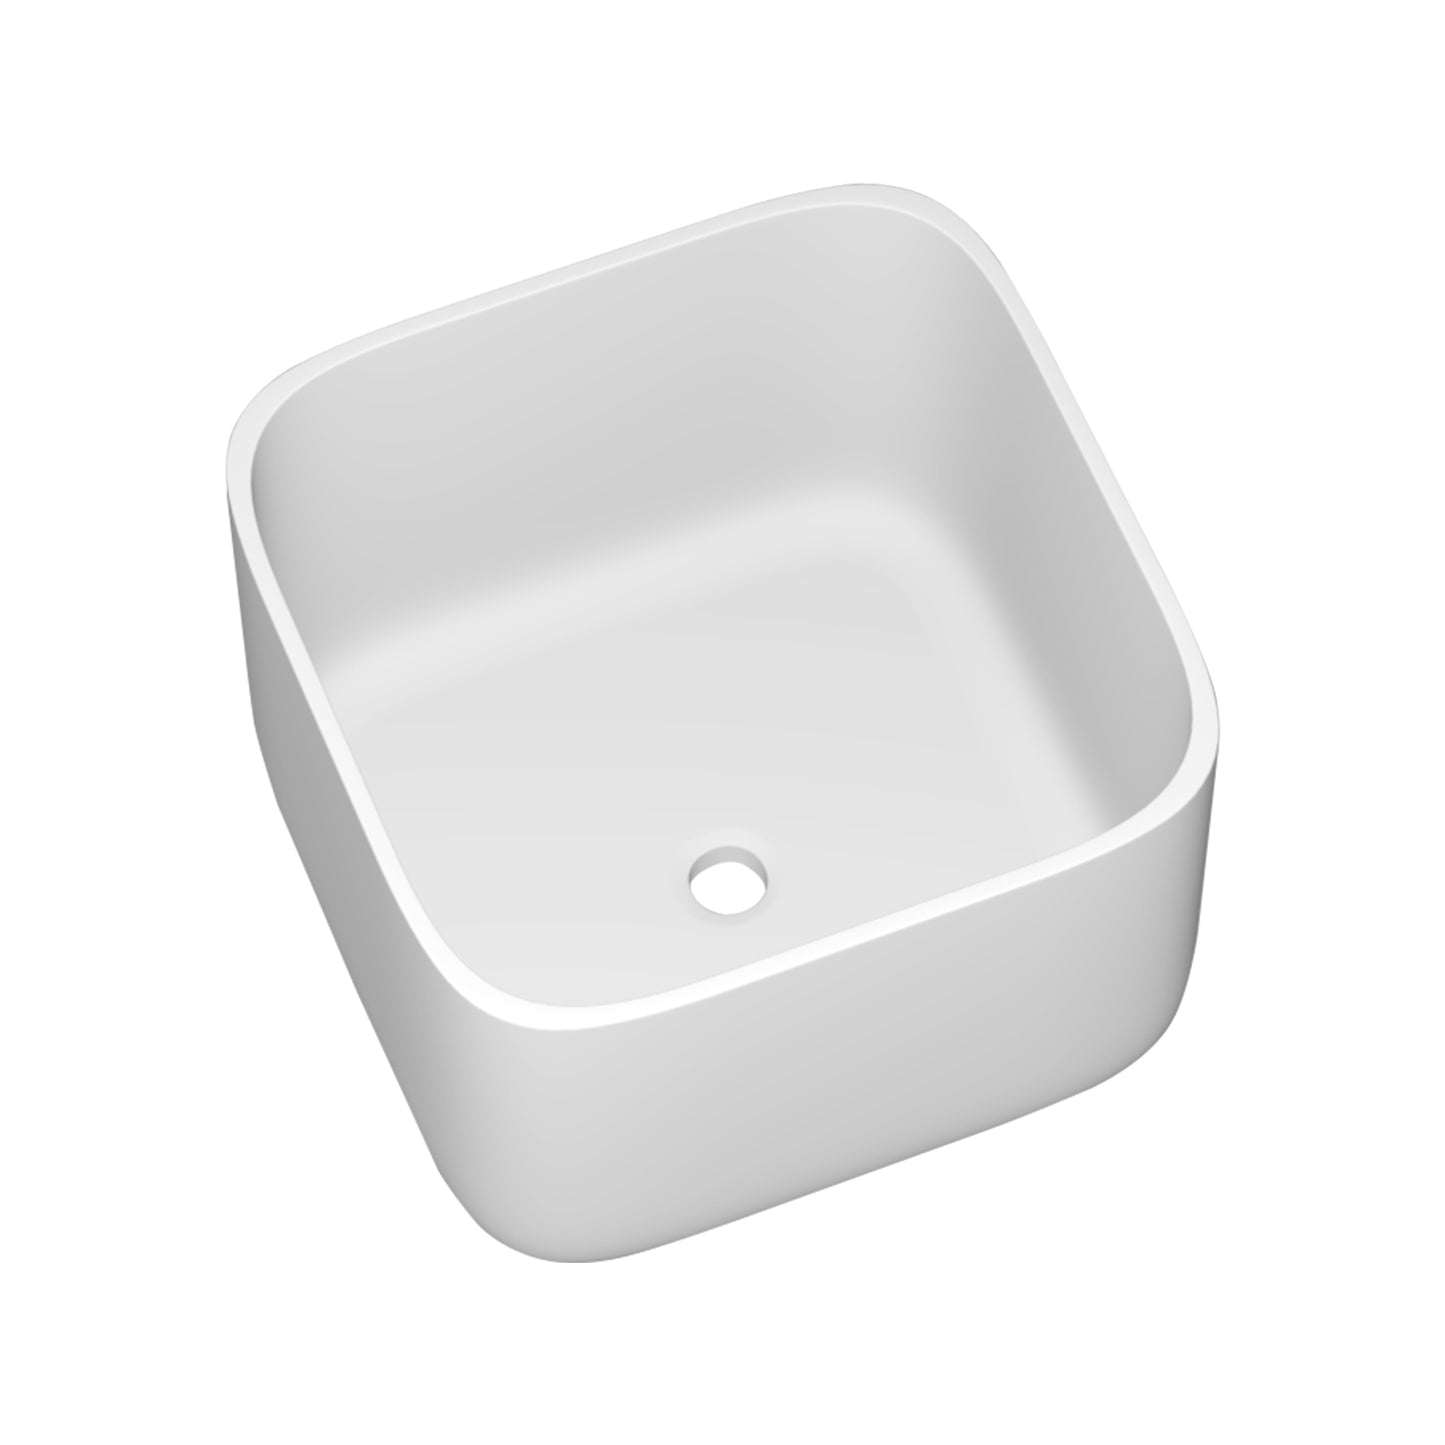 11.2inch depth Solid surface basin